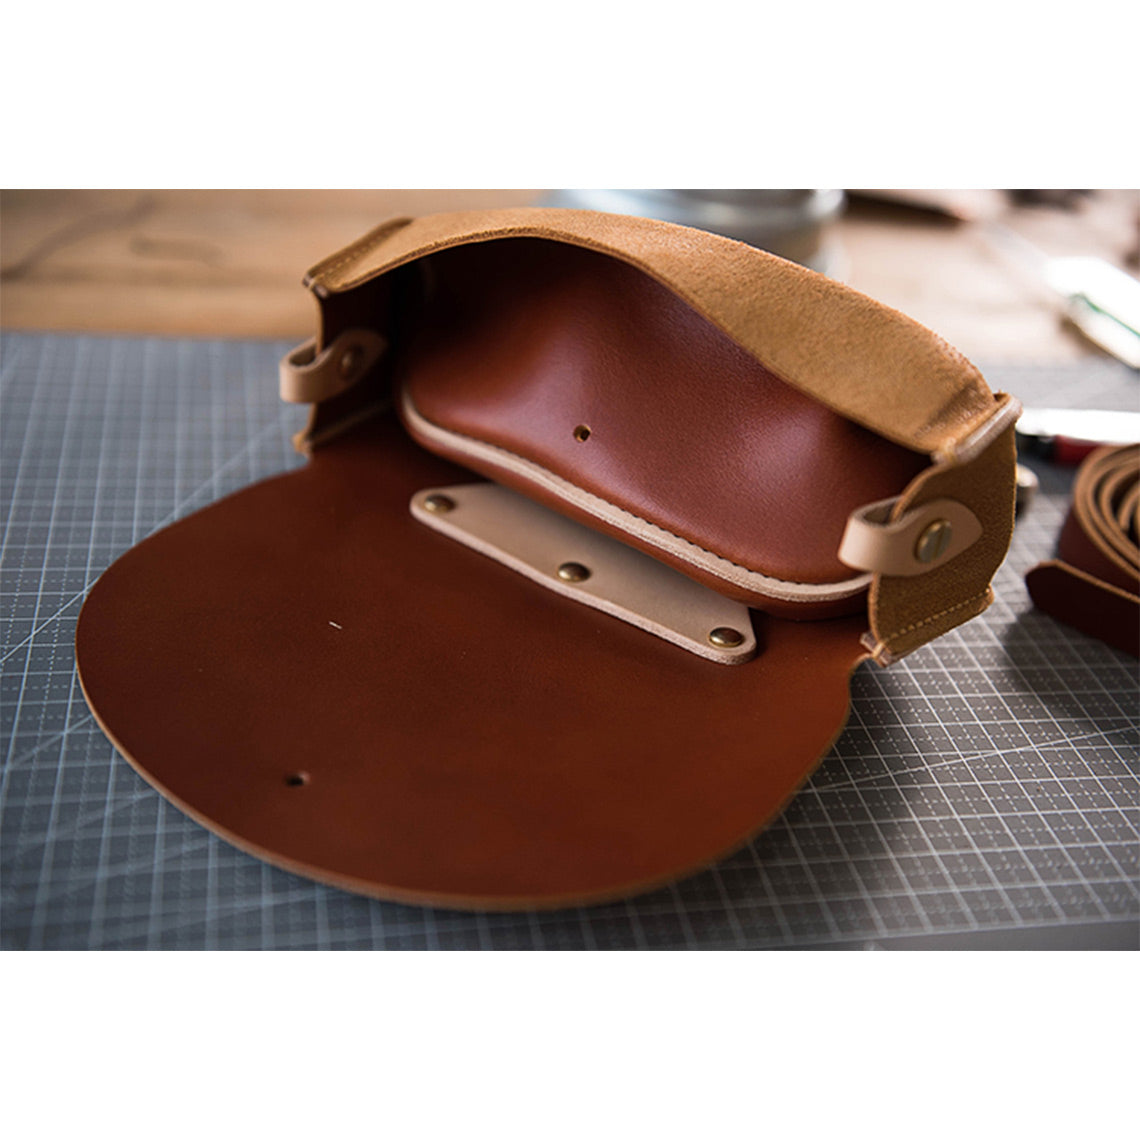 Italian Vegetable Tanned Leather Bag | DIY Crossbody Bag Kit Real Leathercrafts - POPSEWING™